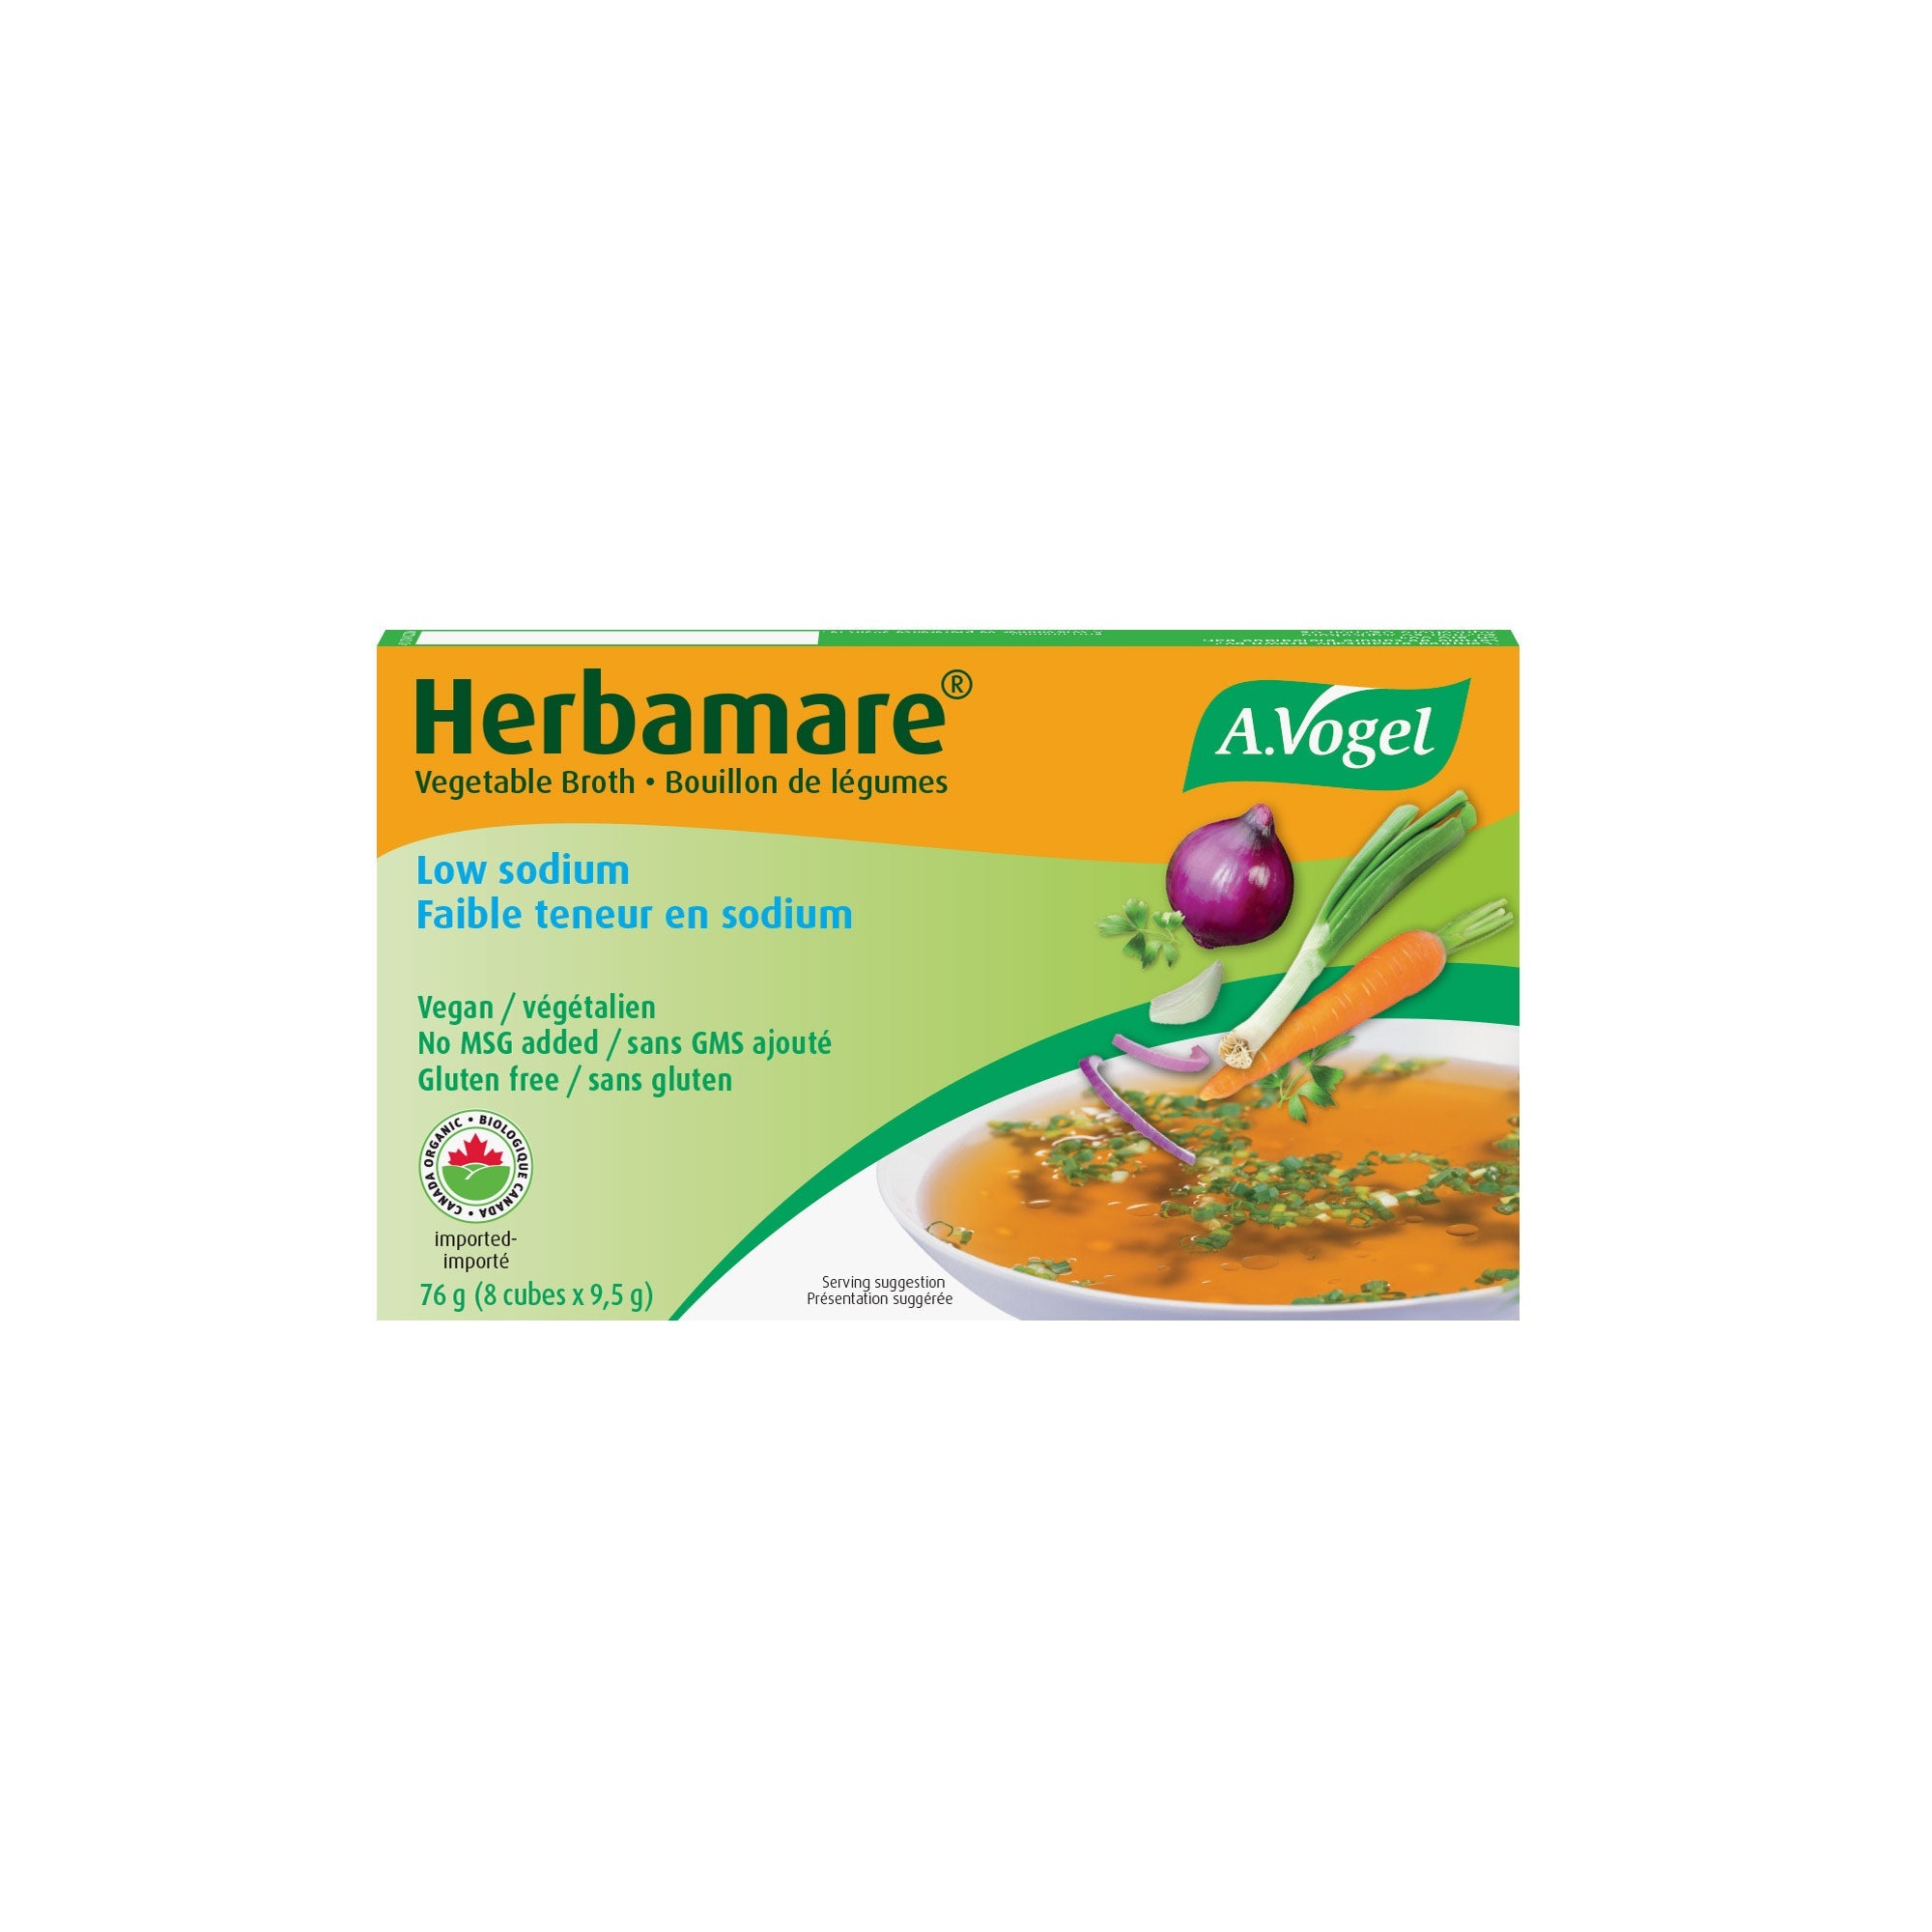 A.Vogel Herbamare Low Sodium Organic Vegetable Broth 8 Cubes - A.Vogel Canada